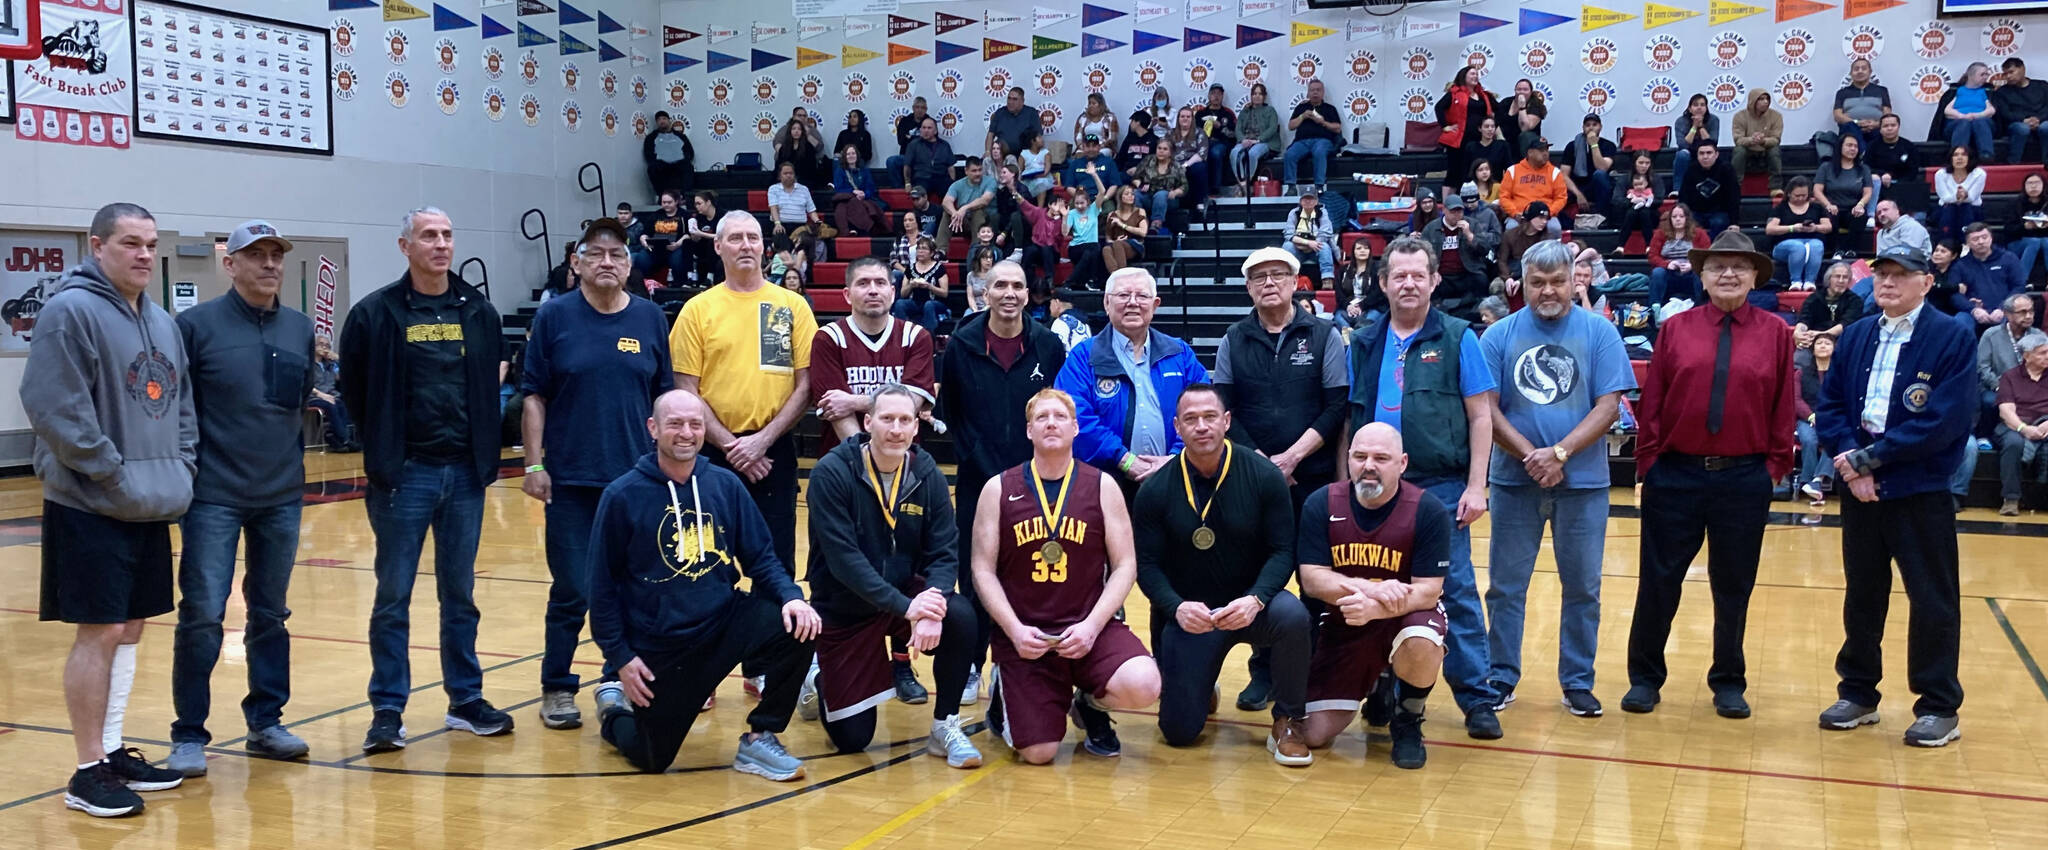 Attending members of the Gold Medal Hall of Fame pose for a photo on Friday, March 24, at the Juneau Lions Club 74th Gold Medal Basketball Tournament at the Juneau-Douglas High School: Yadaa.at Kalé gymnasium. (Klas Stolpe/For the Juneau Empire)